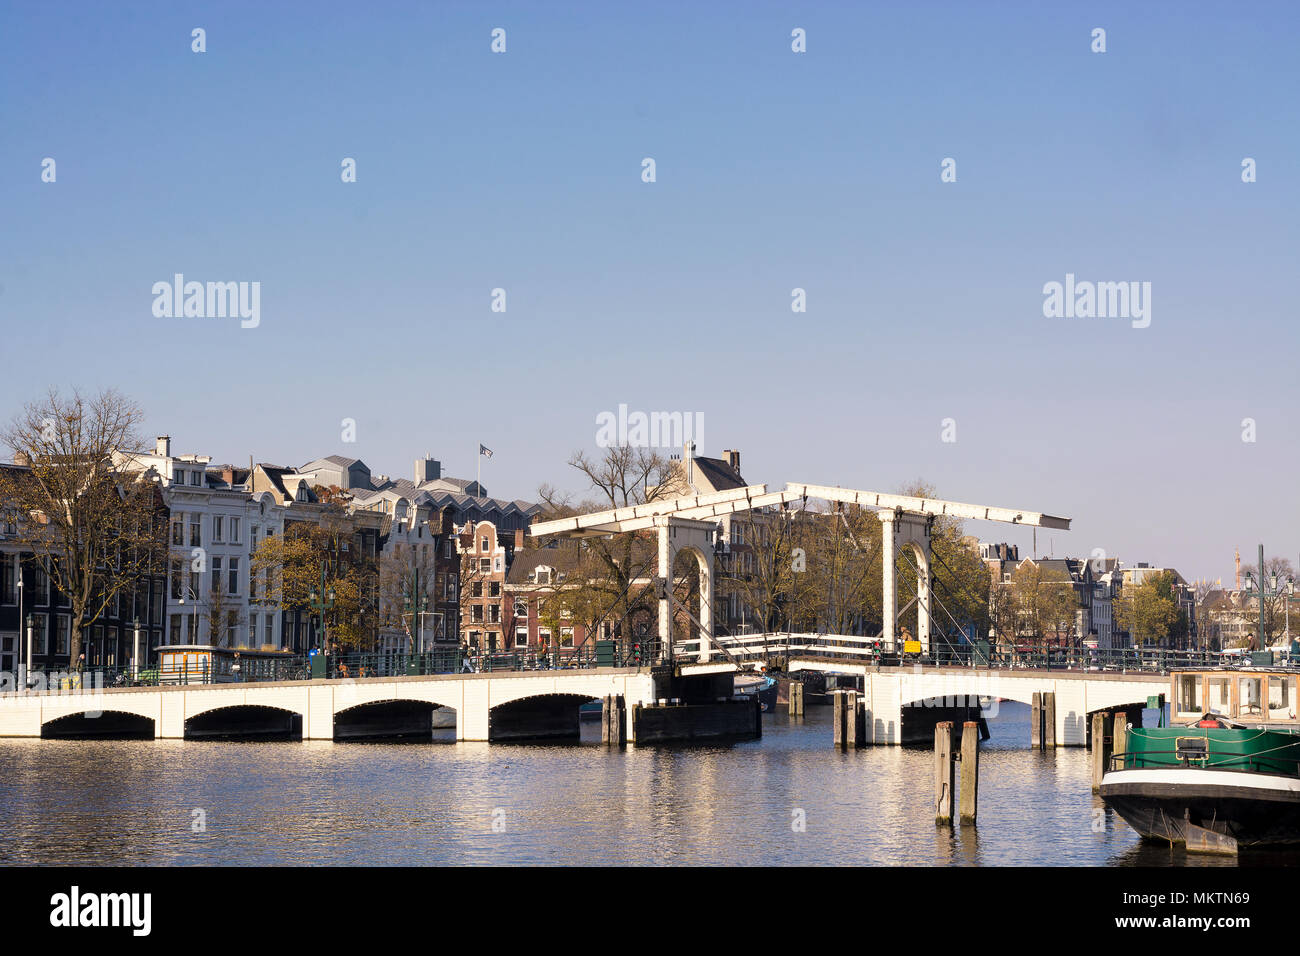 View on the Skinny Bridge over the river Amstel, in Amsterdam, capital of the Netherlands, on a sunny day Stock Photo